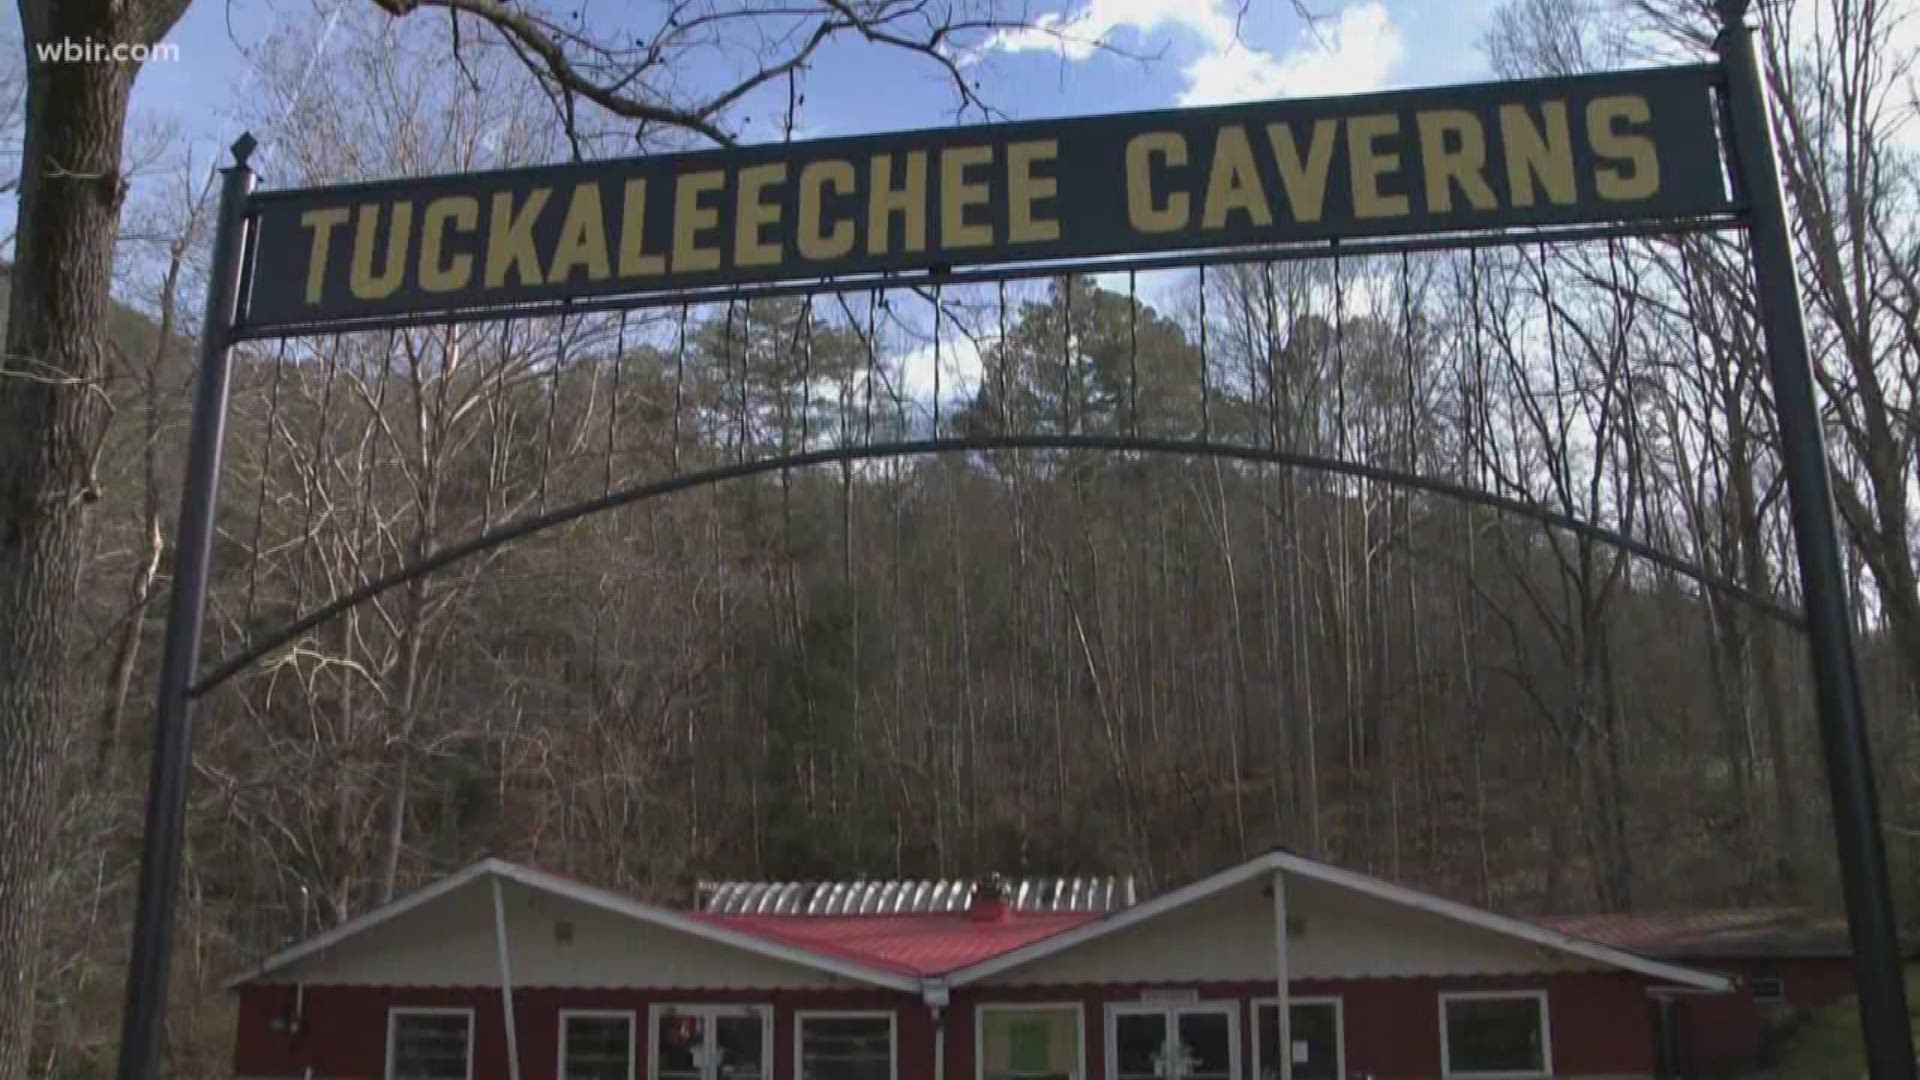 The seismograph at Tuckaleechee Caverns in Townsend recorded the earthquake.